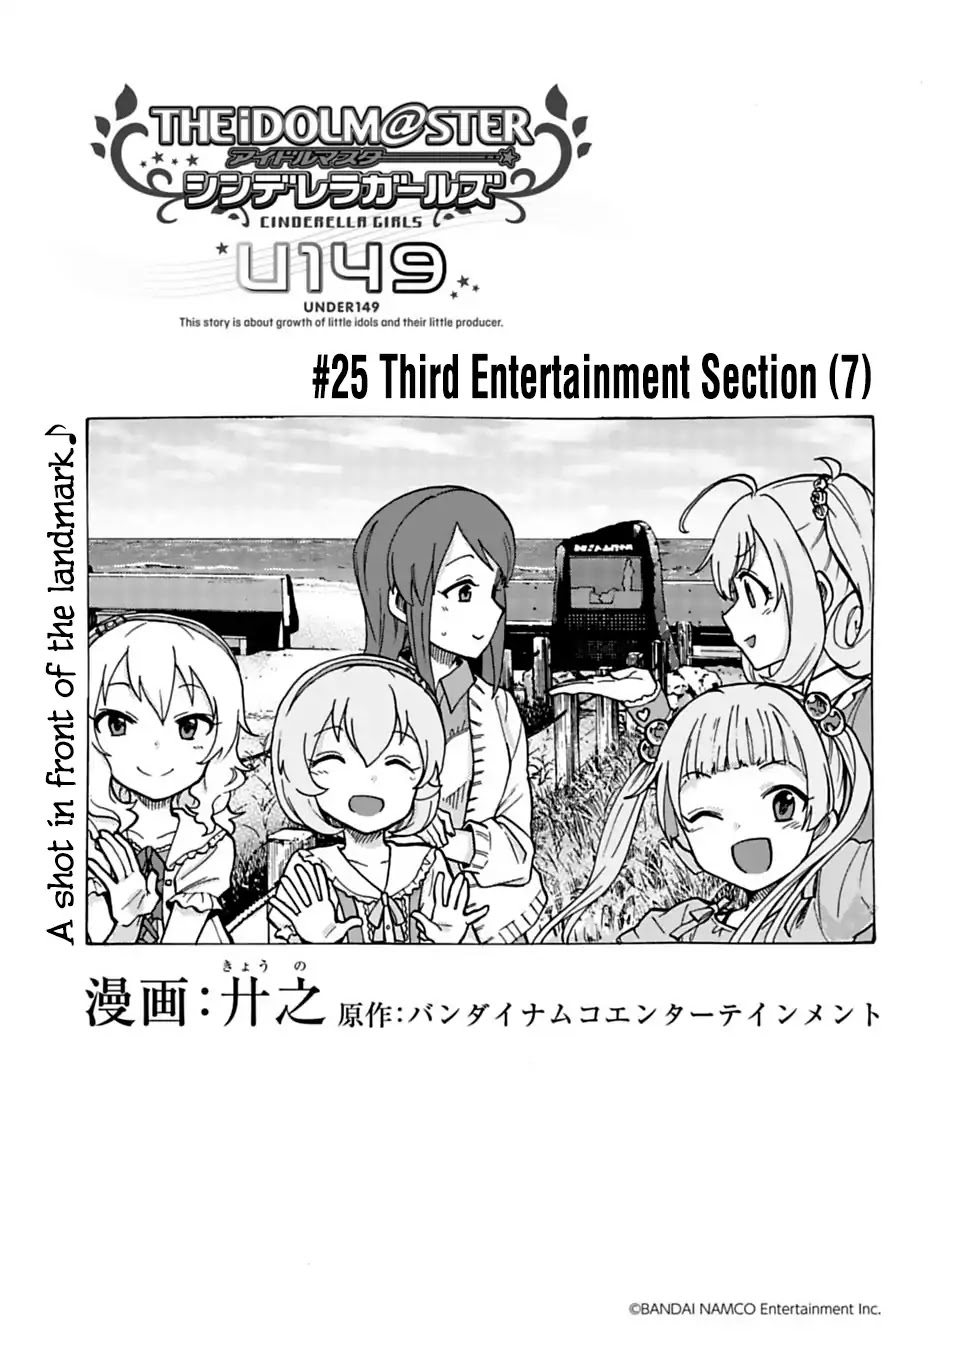 The Idolm@ster Cinderella Girls - U149 Chapter 25: Third Entertainment Section (7) - Picture 1